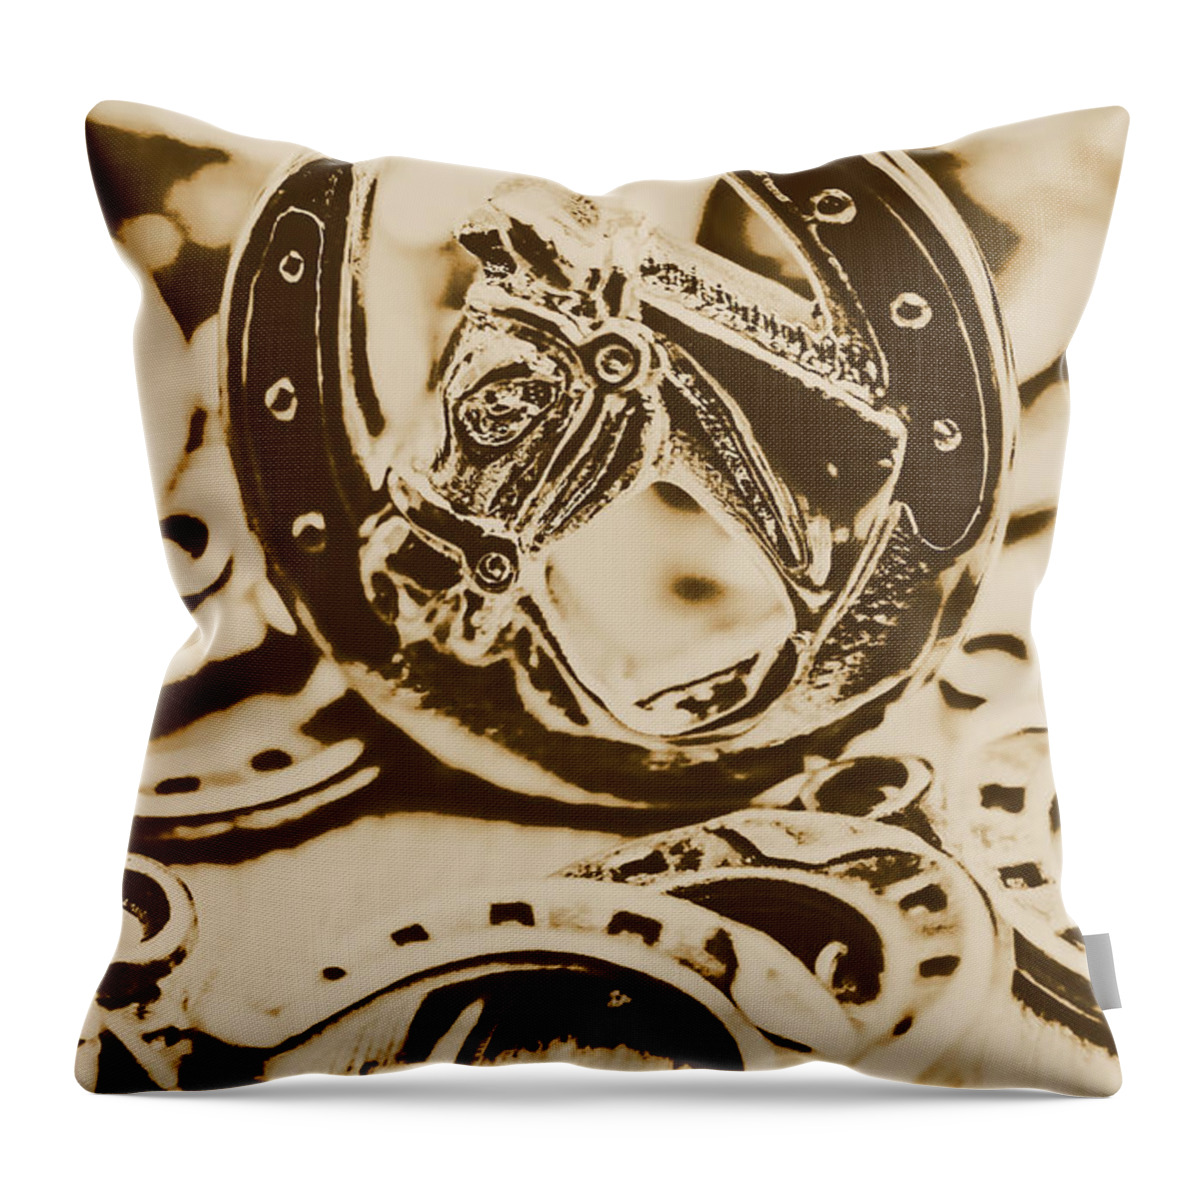 Vintage Throw Pillow featuring the photograph Lucky cowboys charm by Jorgo Photography